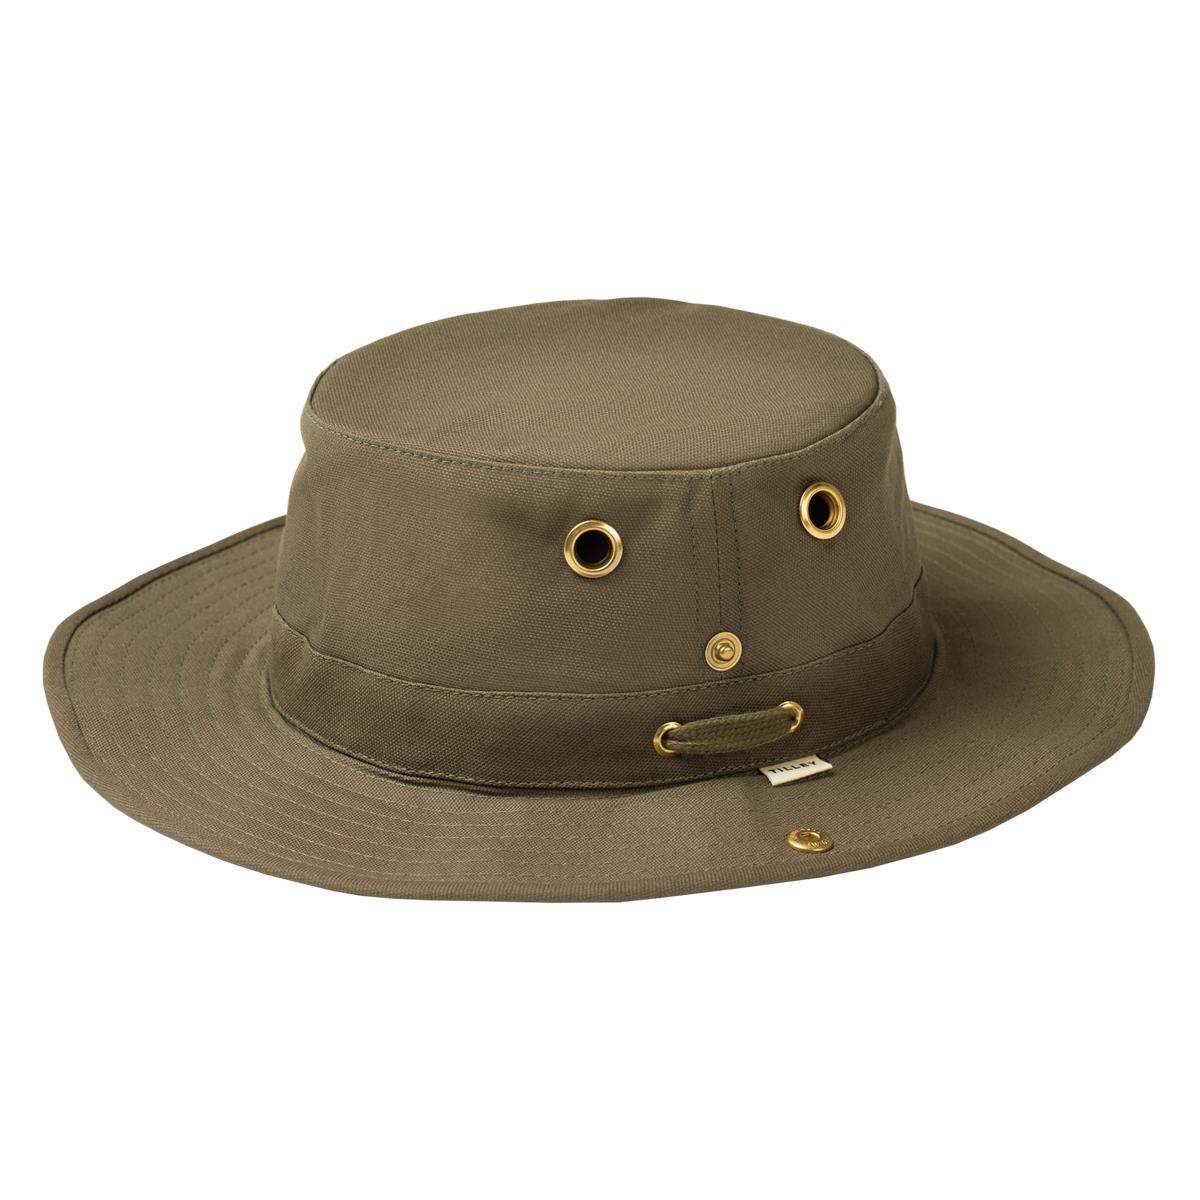 What is the guarantee for the Tilley hemp hat?